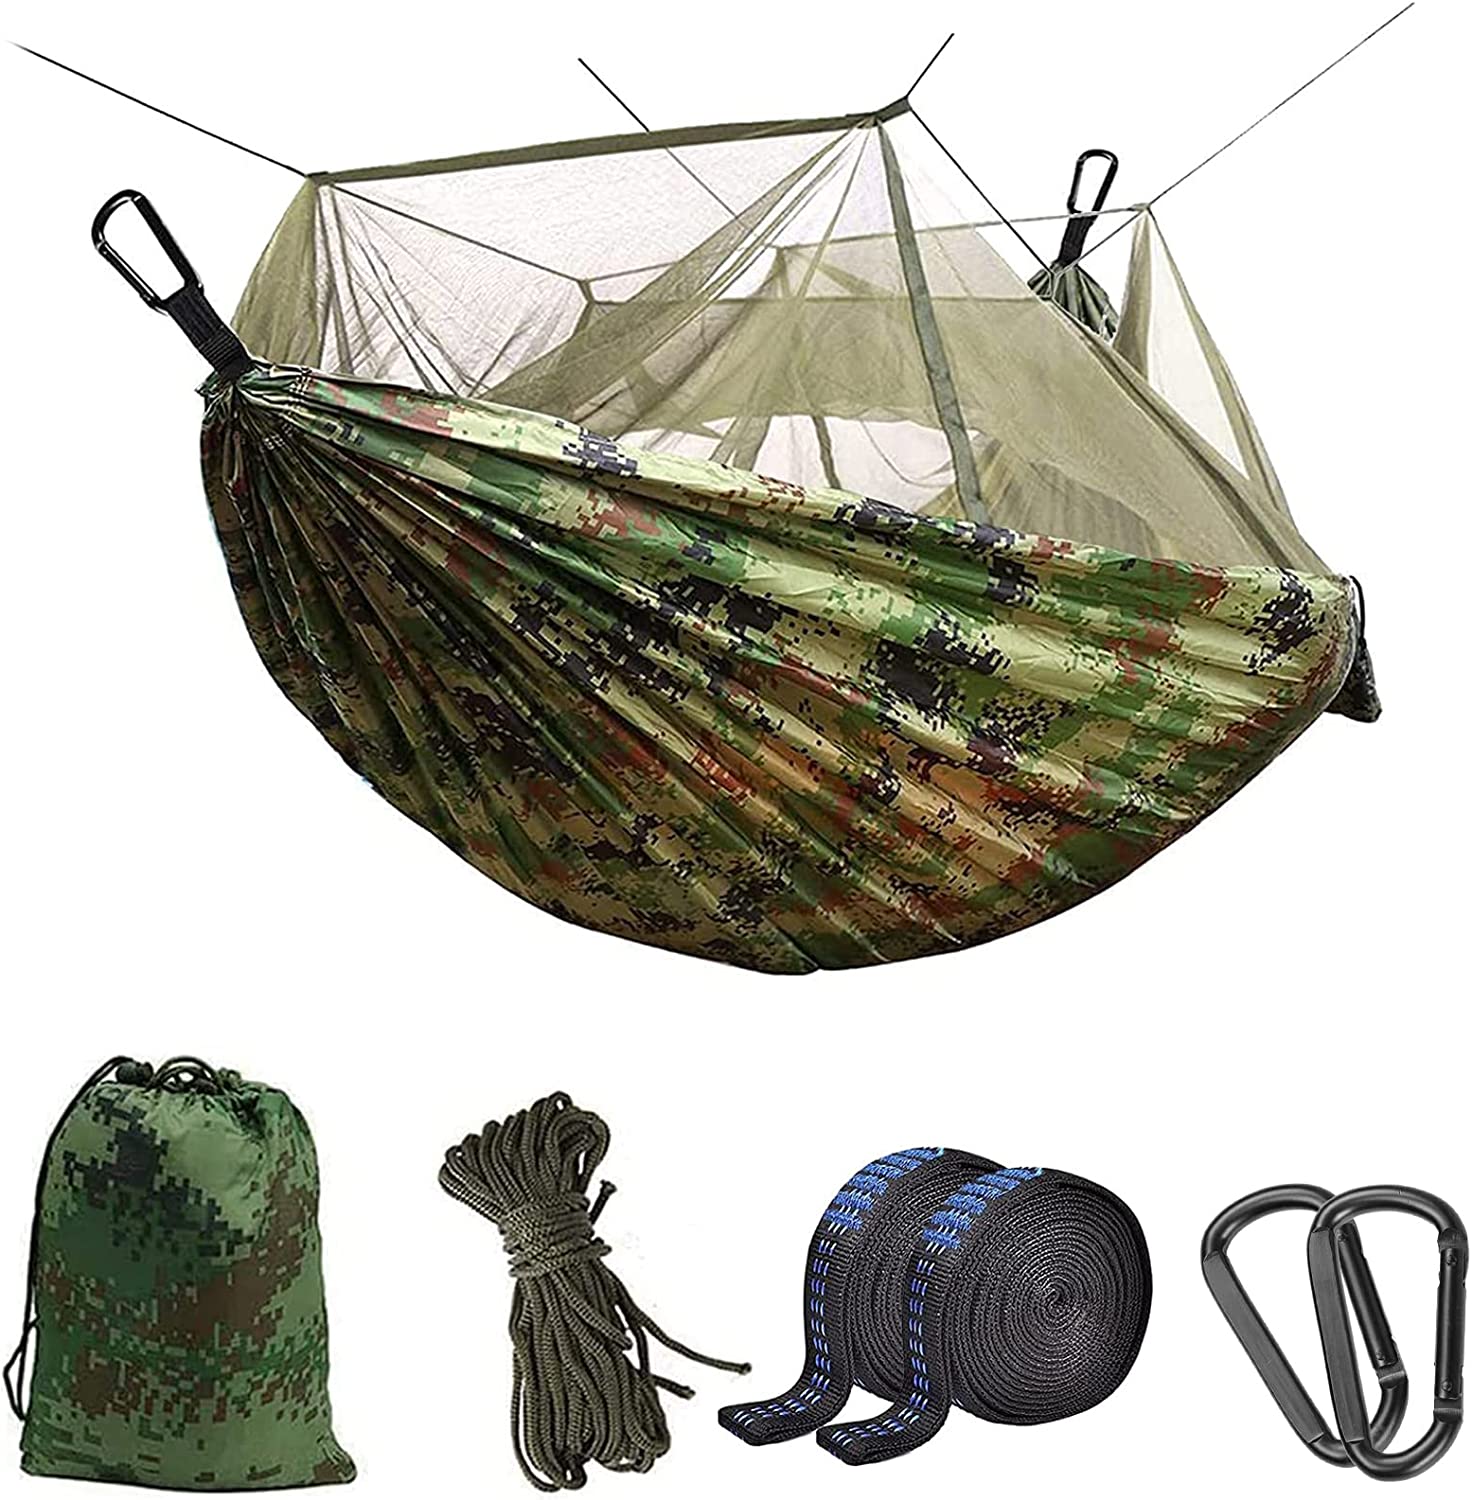 6 Best Hammocks With Mosquito Nets